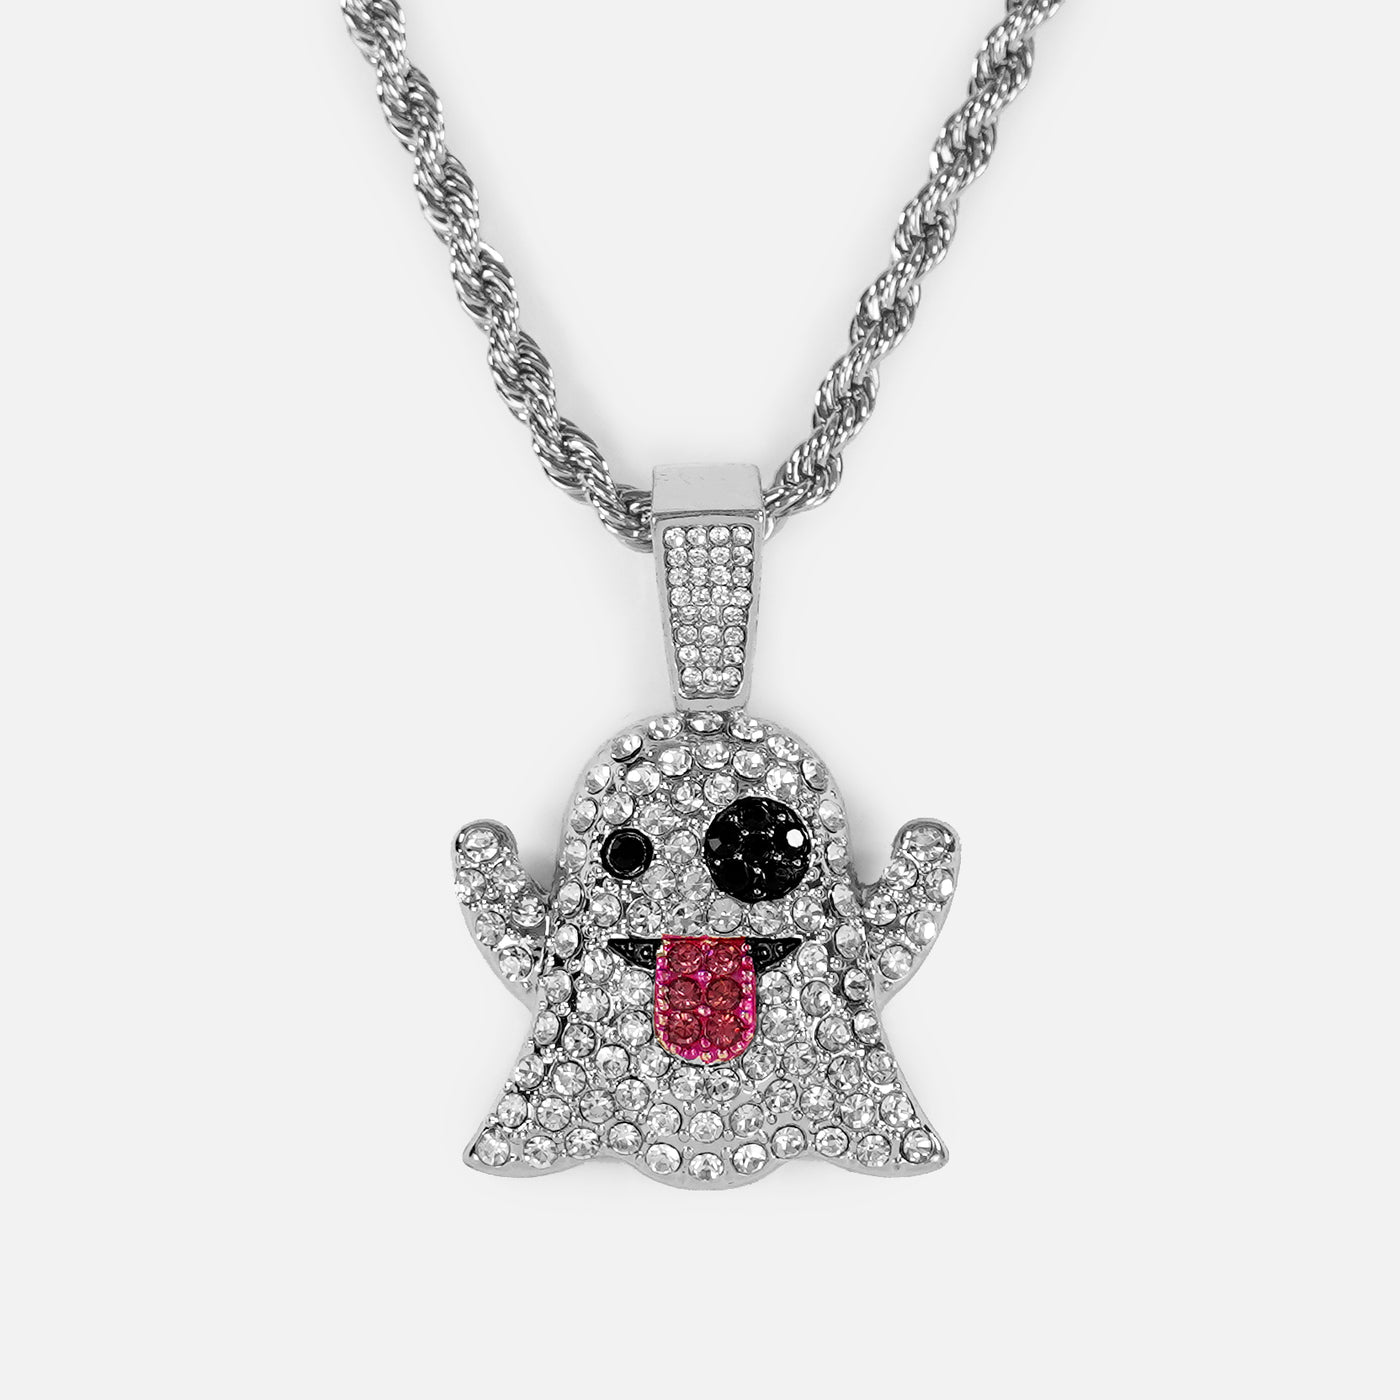 Ghost 1¼" Pendant with Chain Necklace - Stainless Steel